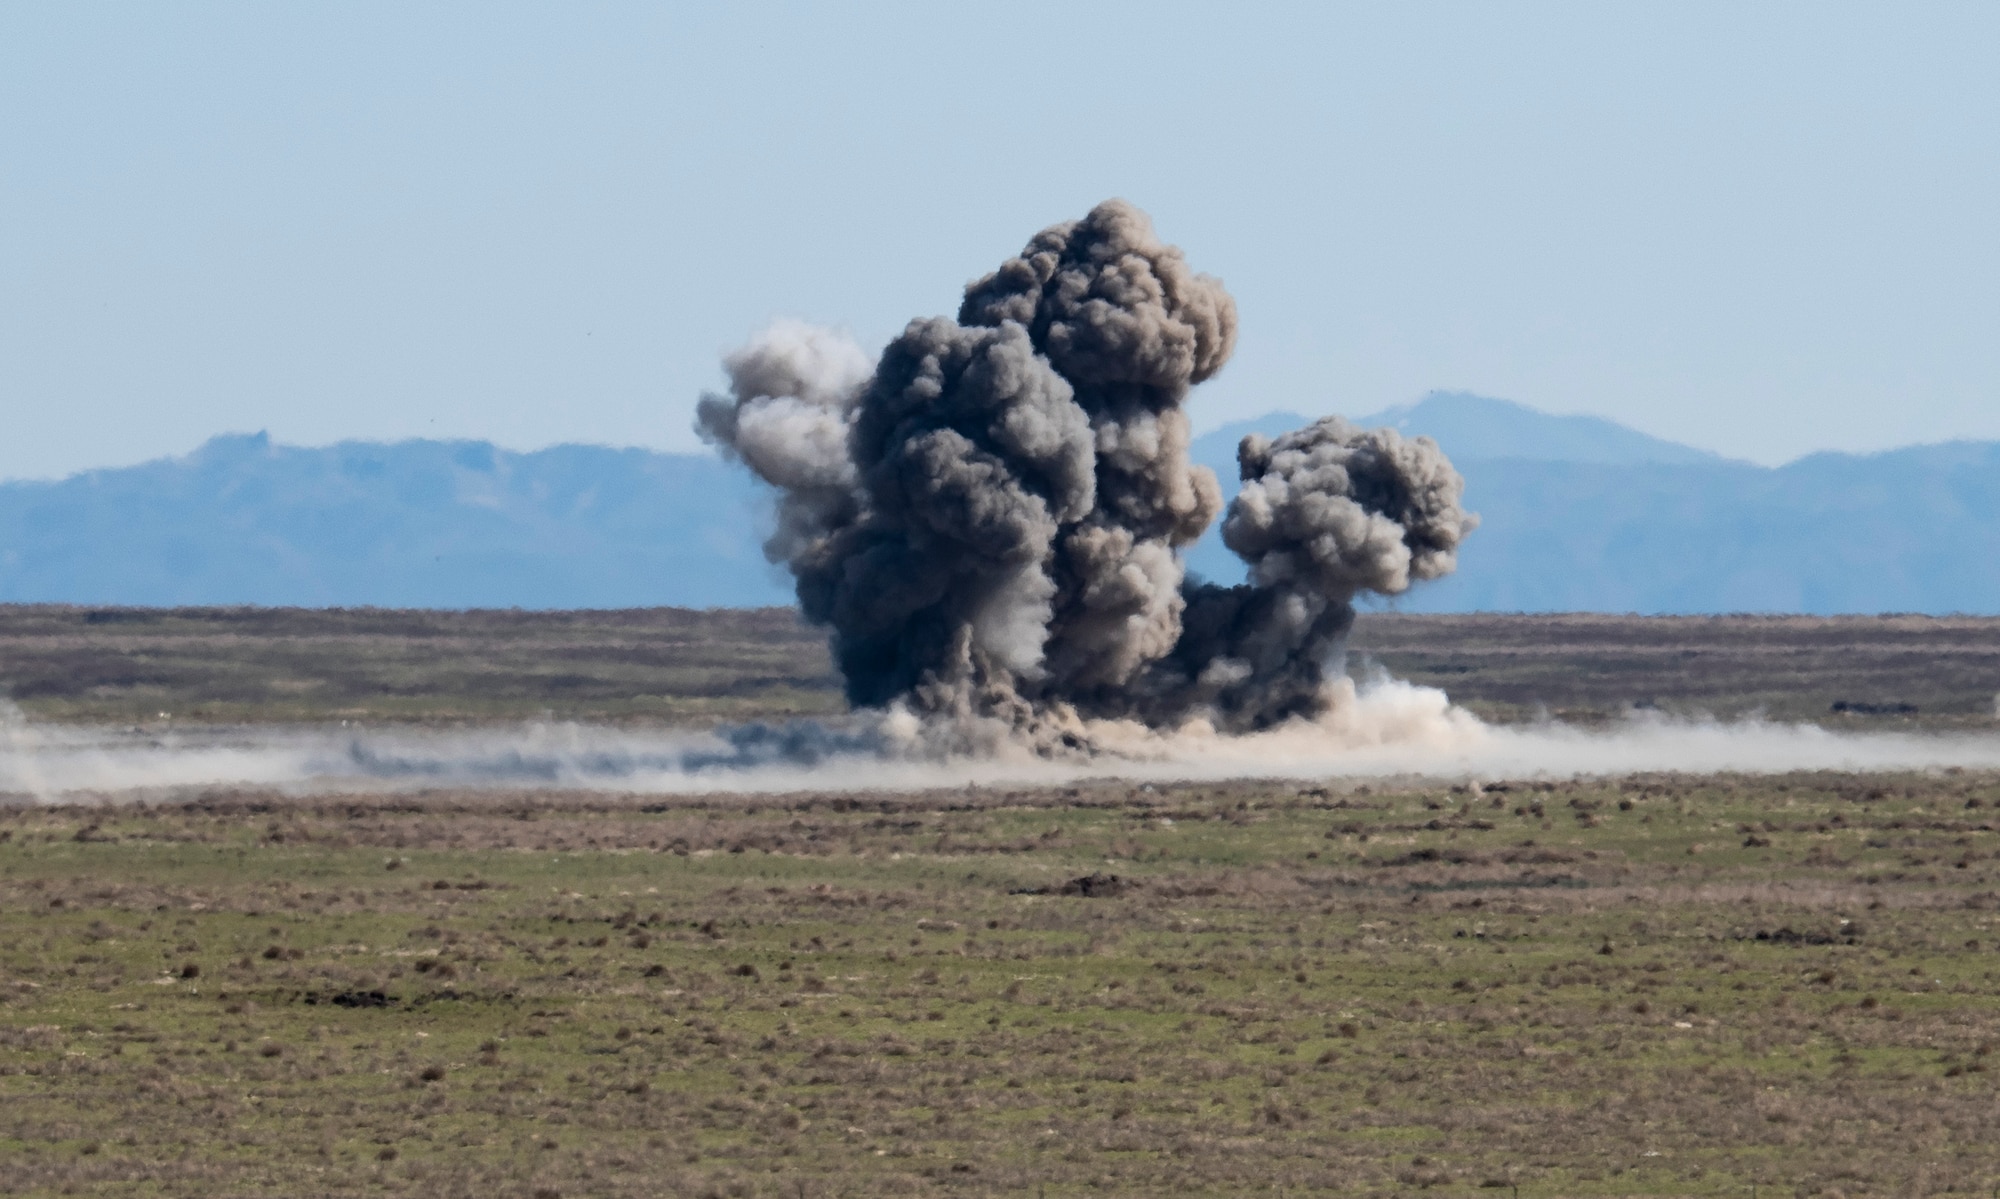 An exposion from a Mark 82 bomb ignites, April 17, 2020, at Orchard Combat Training Center, Idaho. Two F-15E Strike Eagles from the 391st Fighter Squadron dropped six Mark 82 bombs into the dudded impact area to enhance training capabilities with the Army National Guard. (U.S. Air Force photo by Airman Natalie Rubenak).